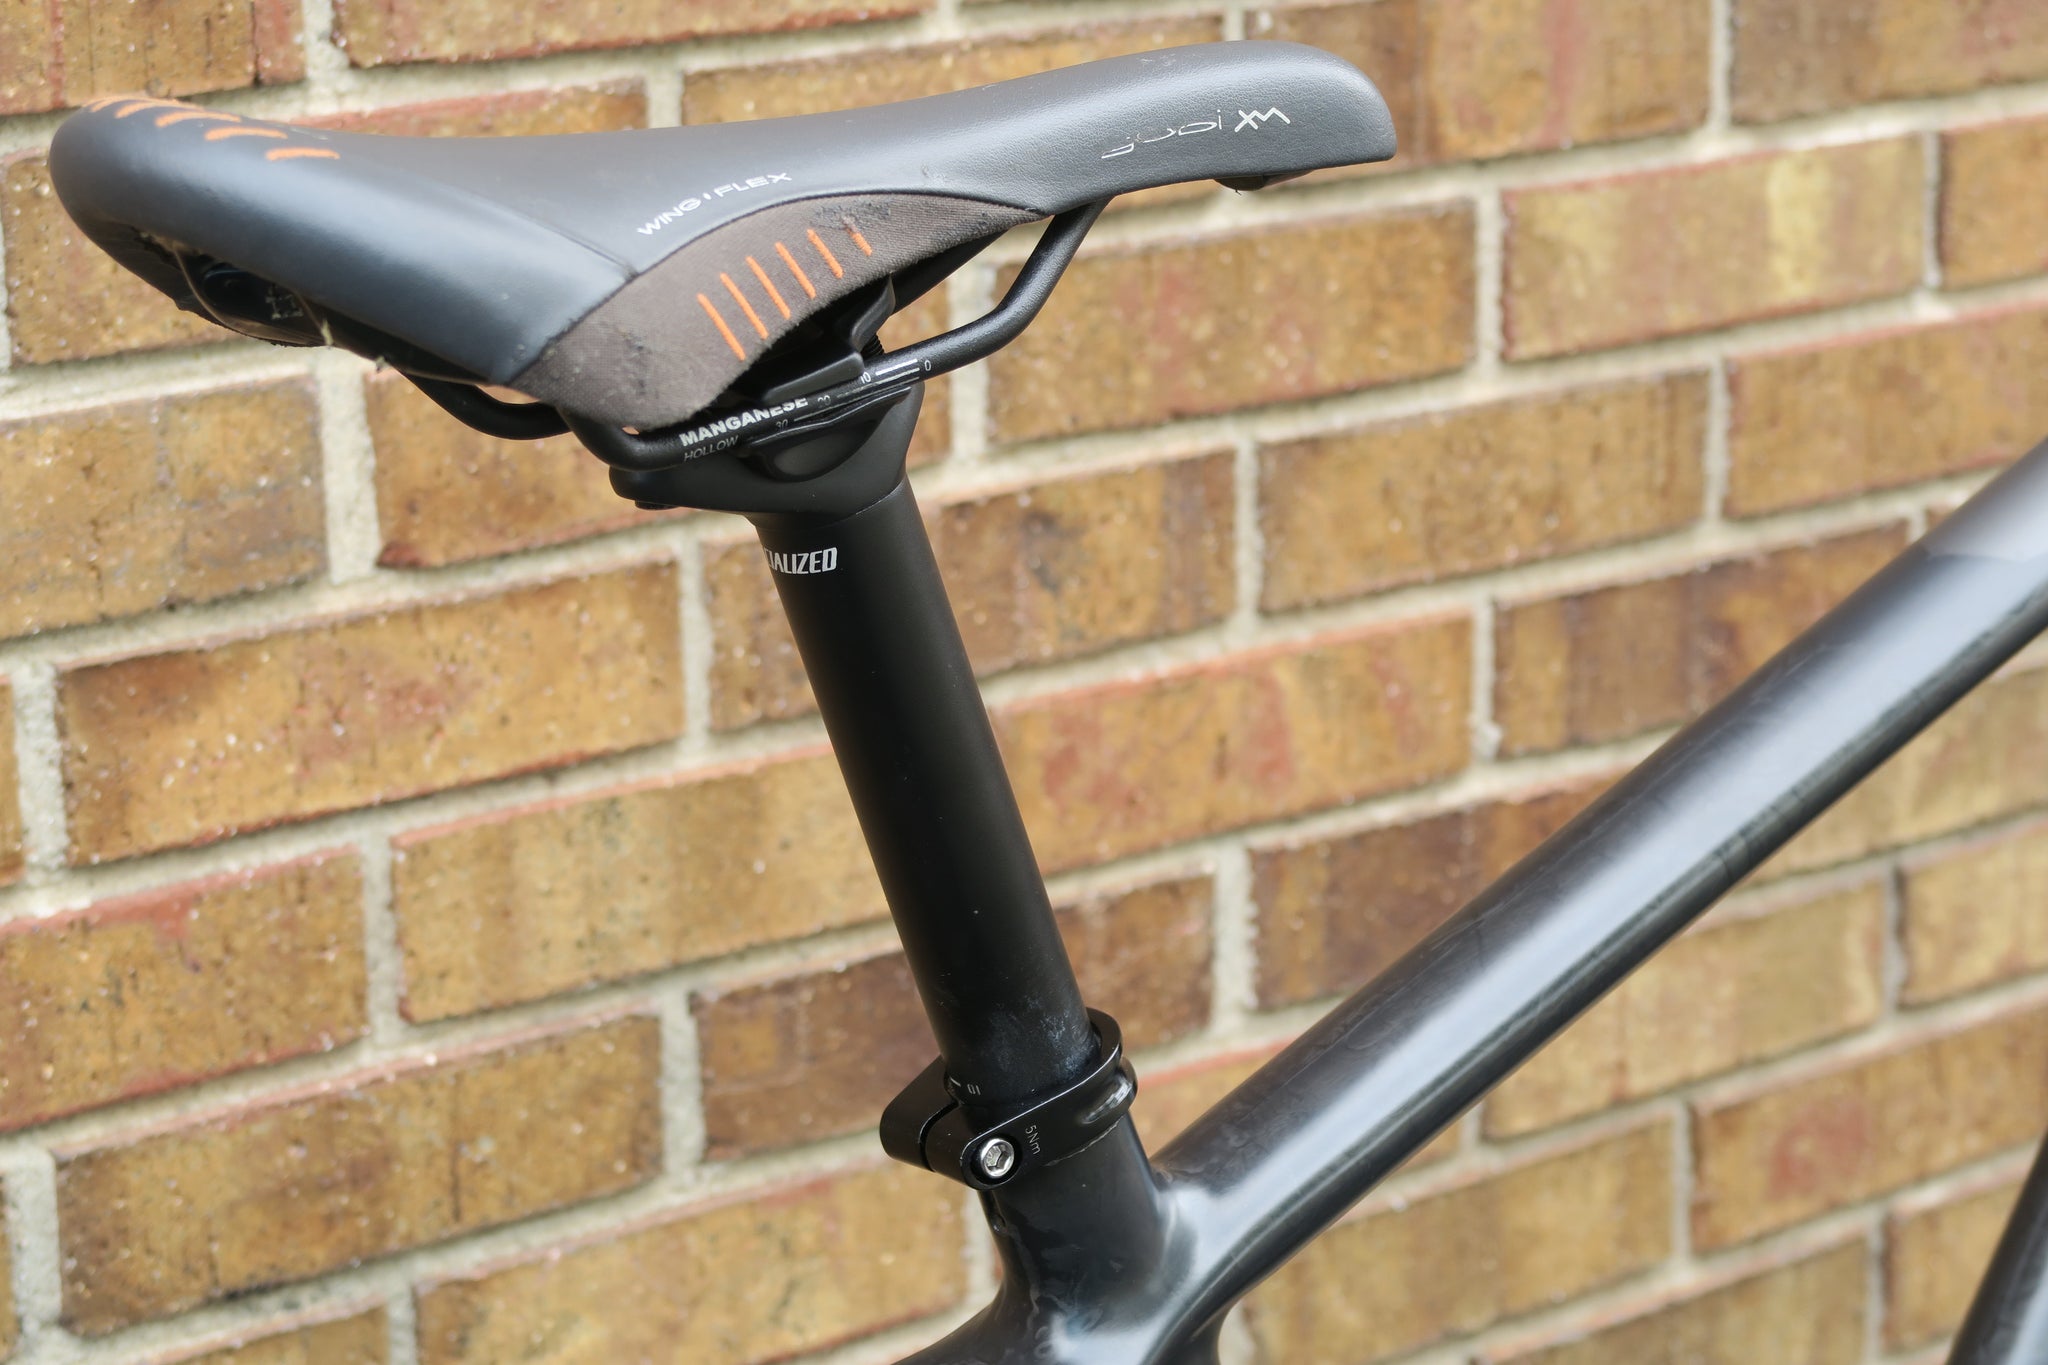 2015 FOUNDRY TOMAHAWK CARBON 27.5"